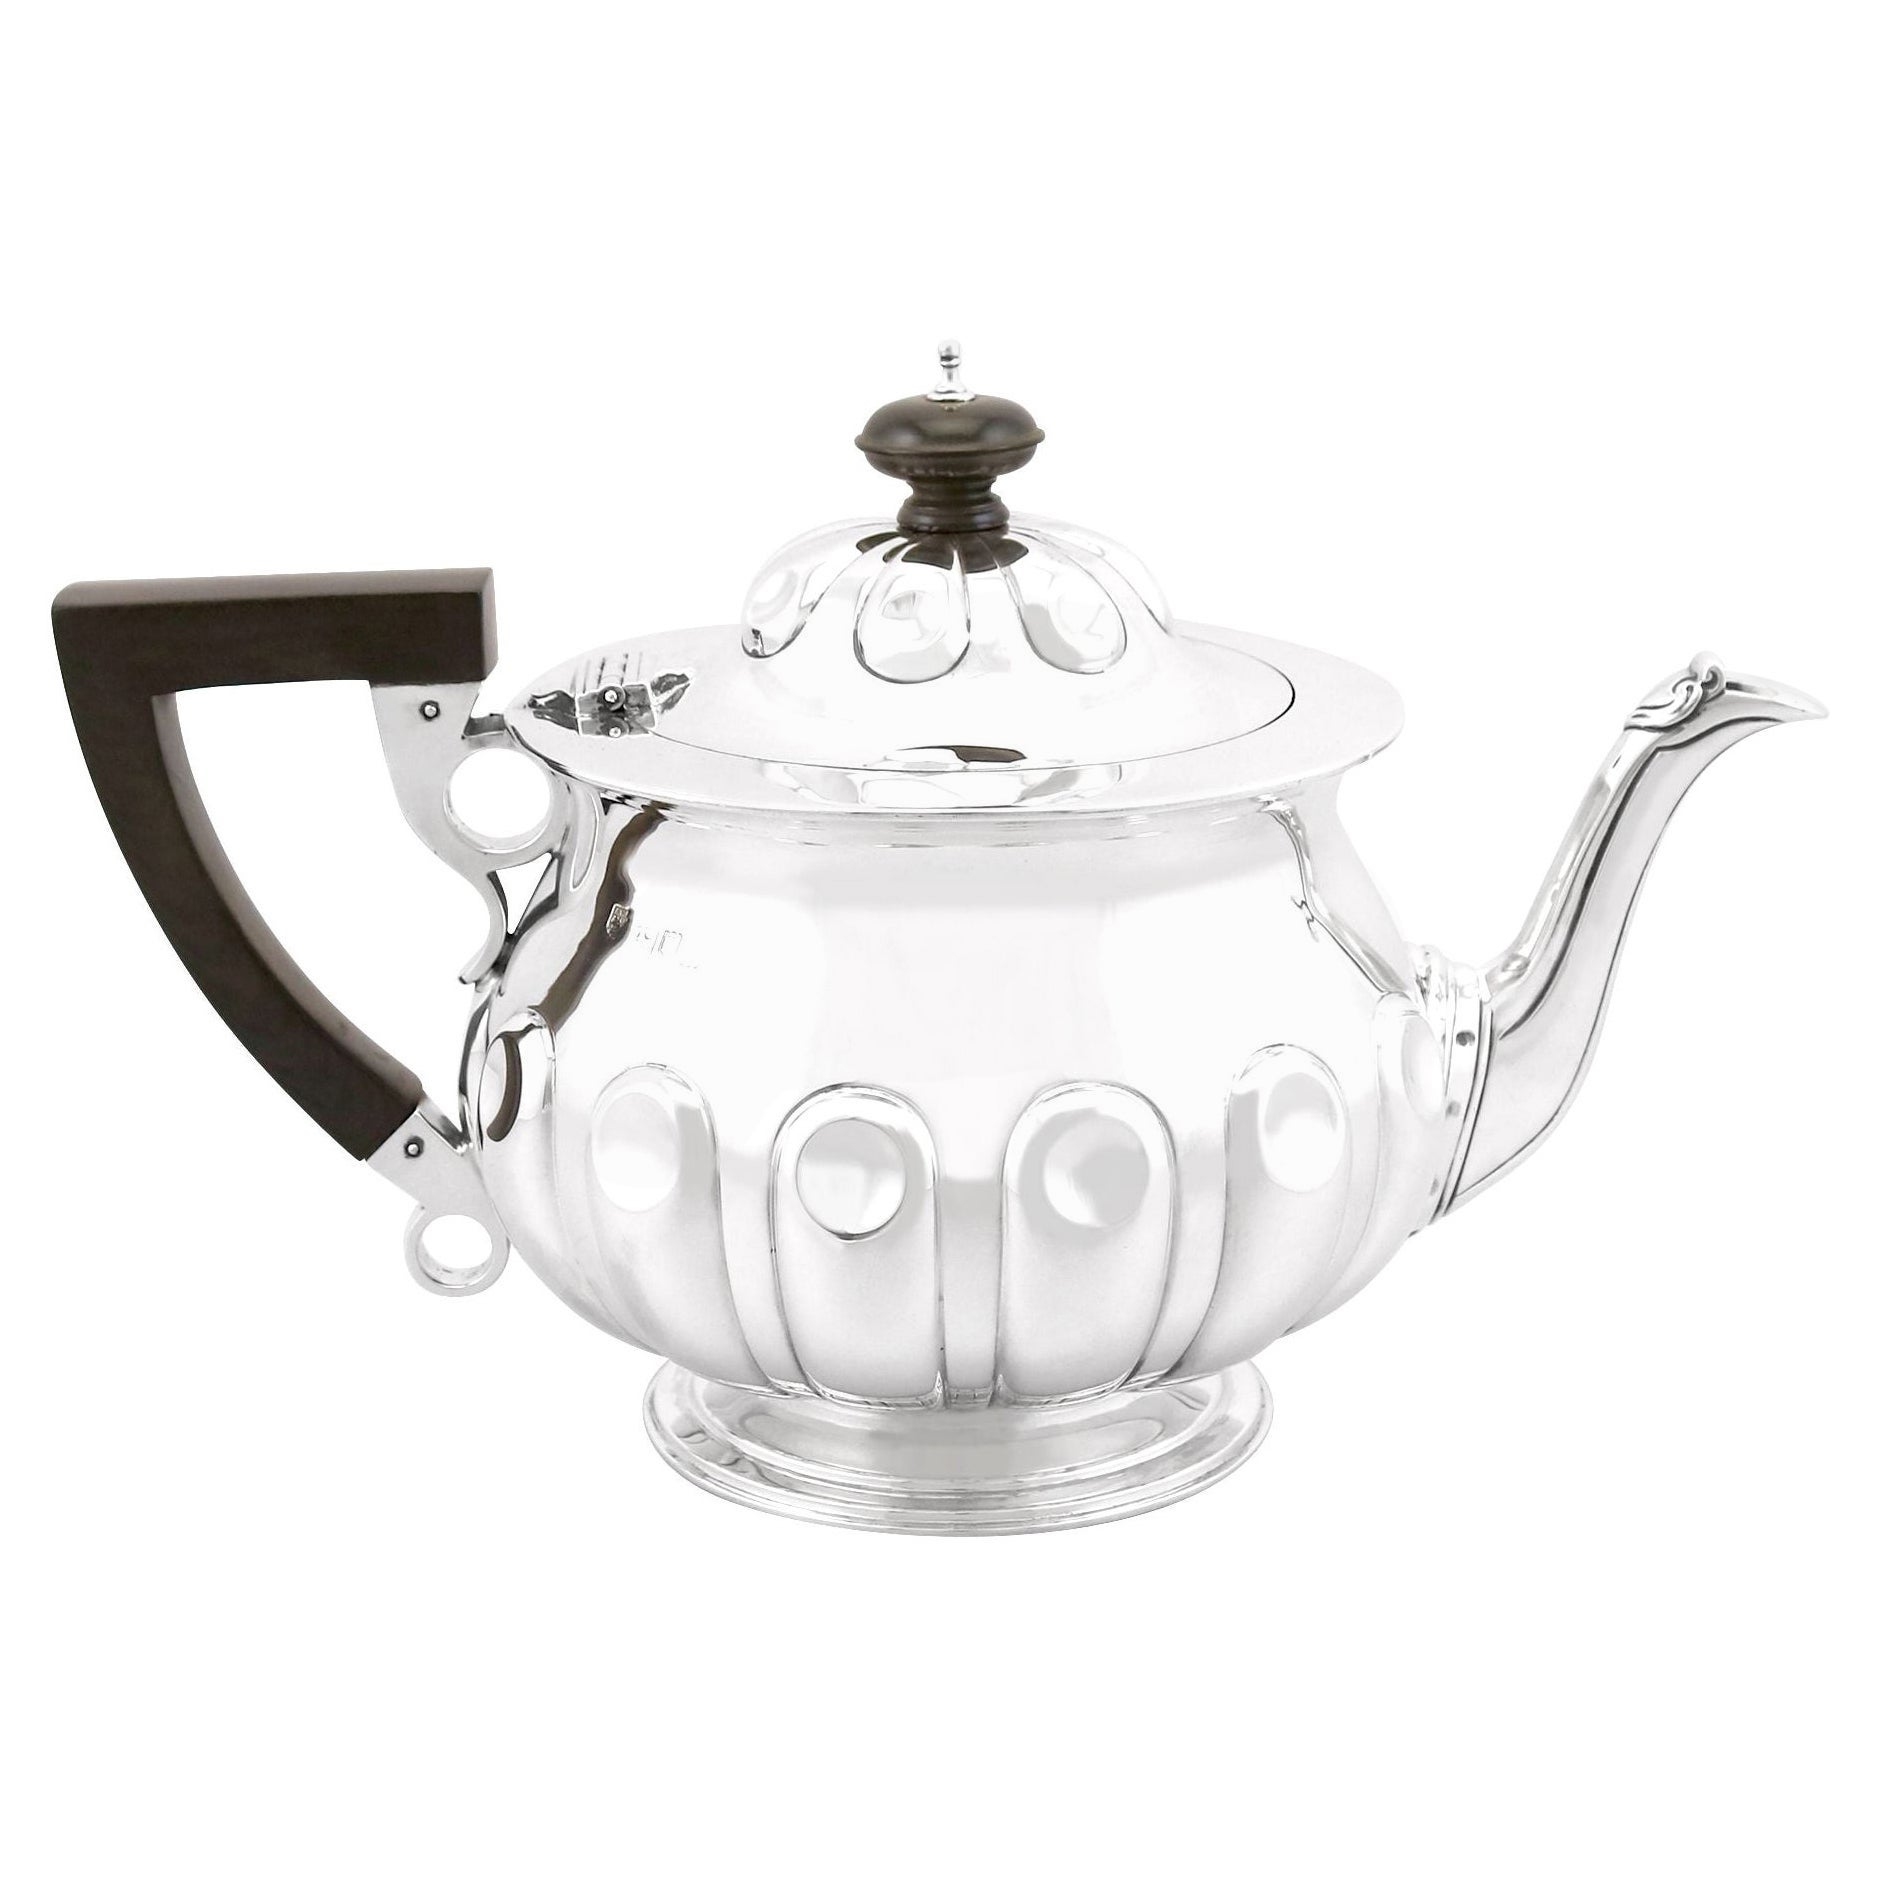 Reid & Sons Antique Edwardian Arts & Crafts Style Sterling Silver Teapot